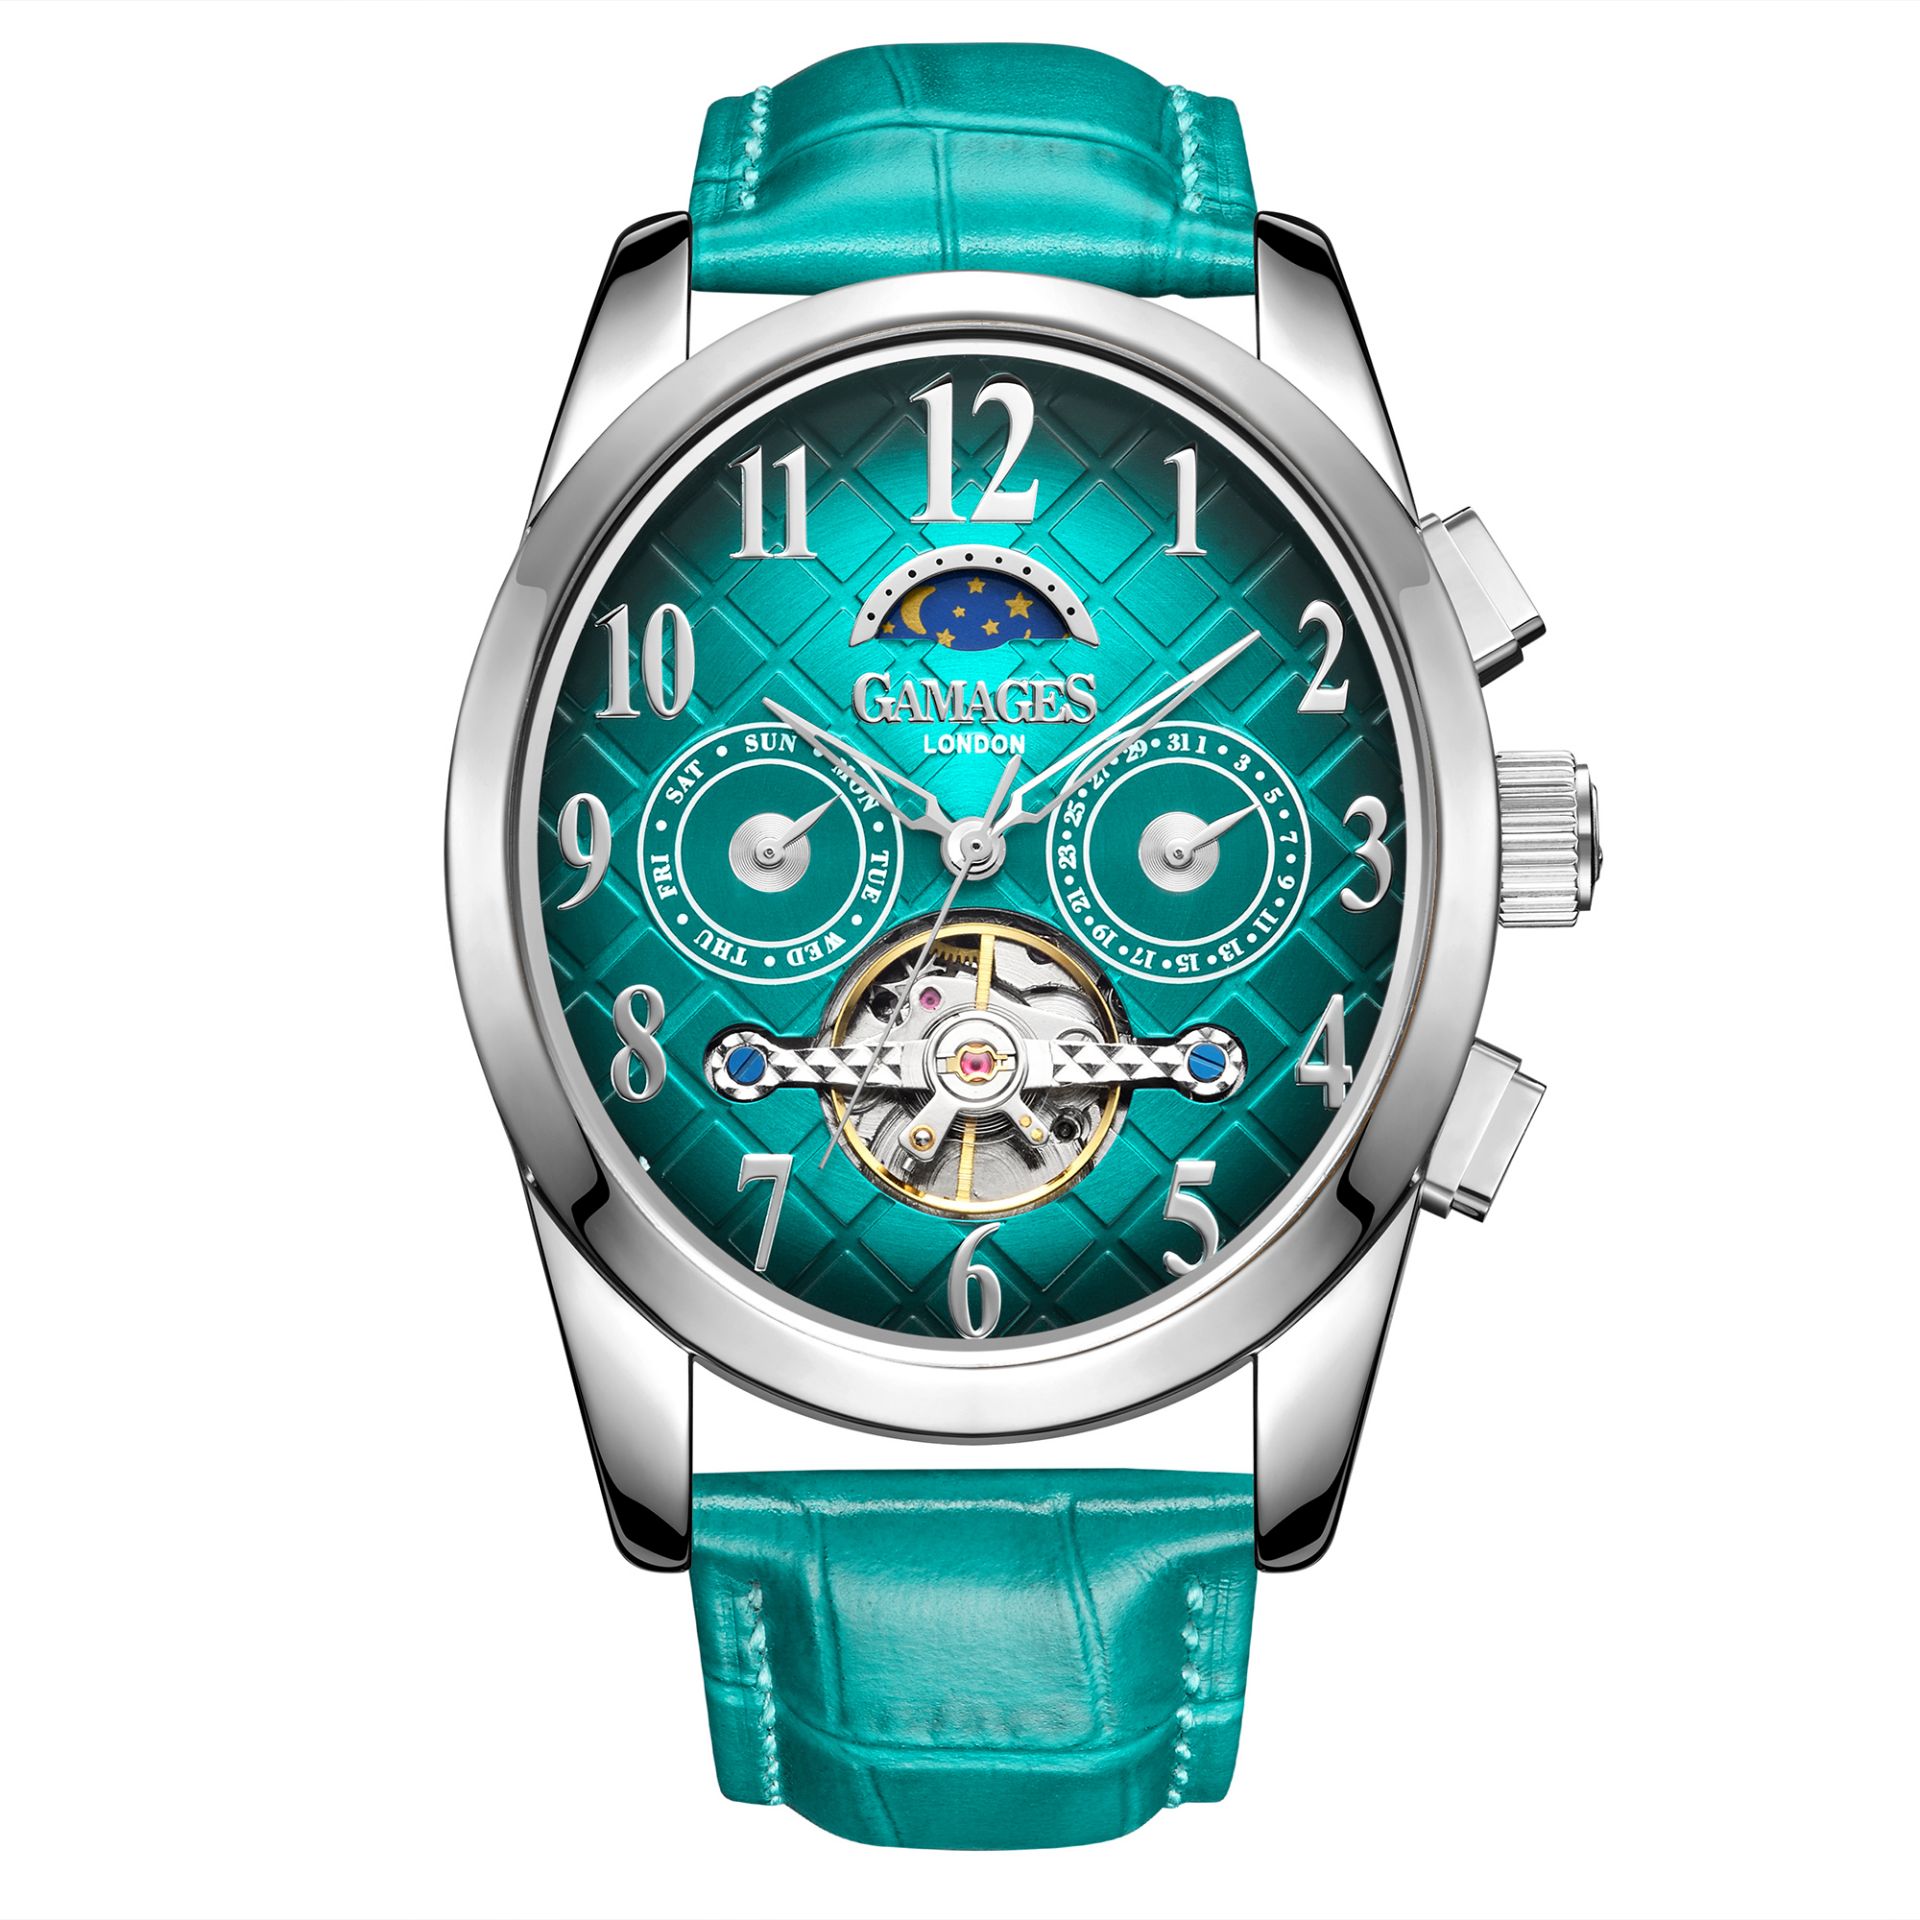 Gamages of London Hand Assembled Muse Automatic Silver Teal - 5 Year Warranty & Free Delivery - Image 3 of 5